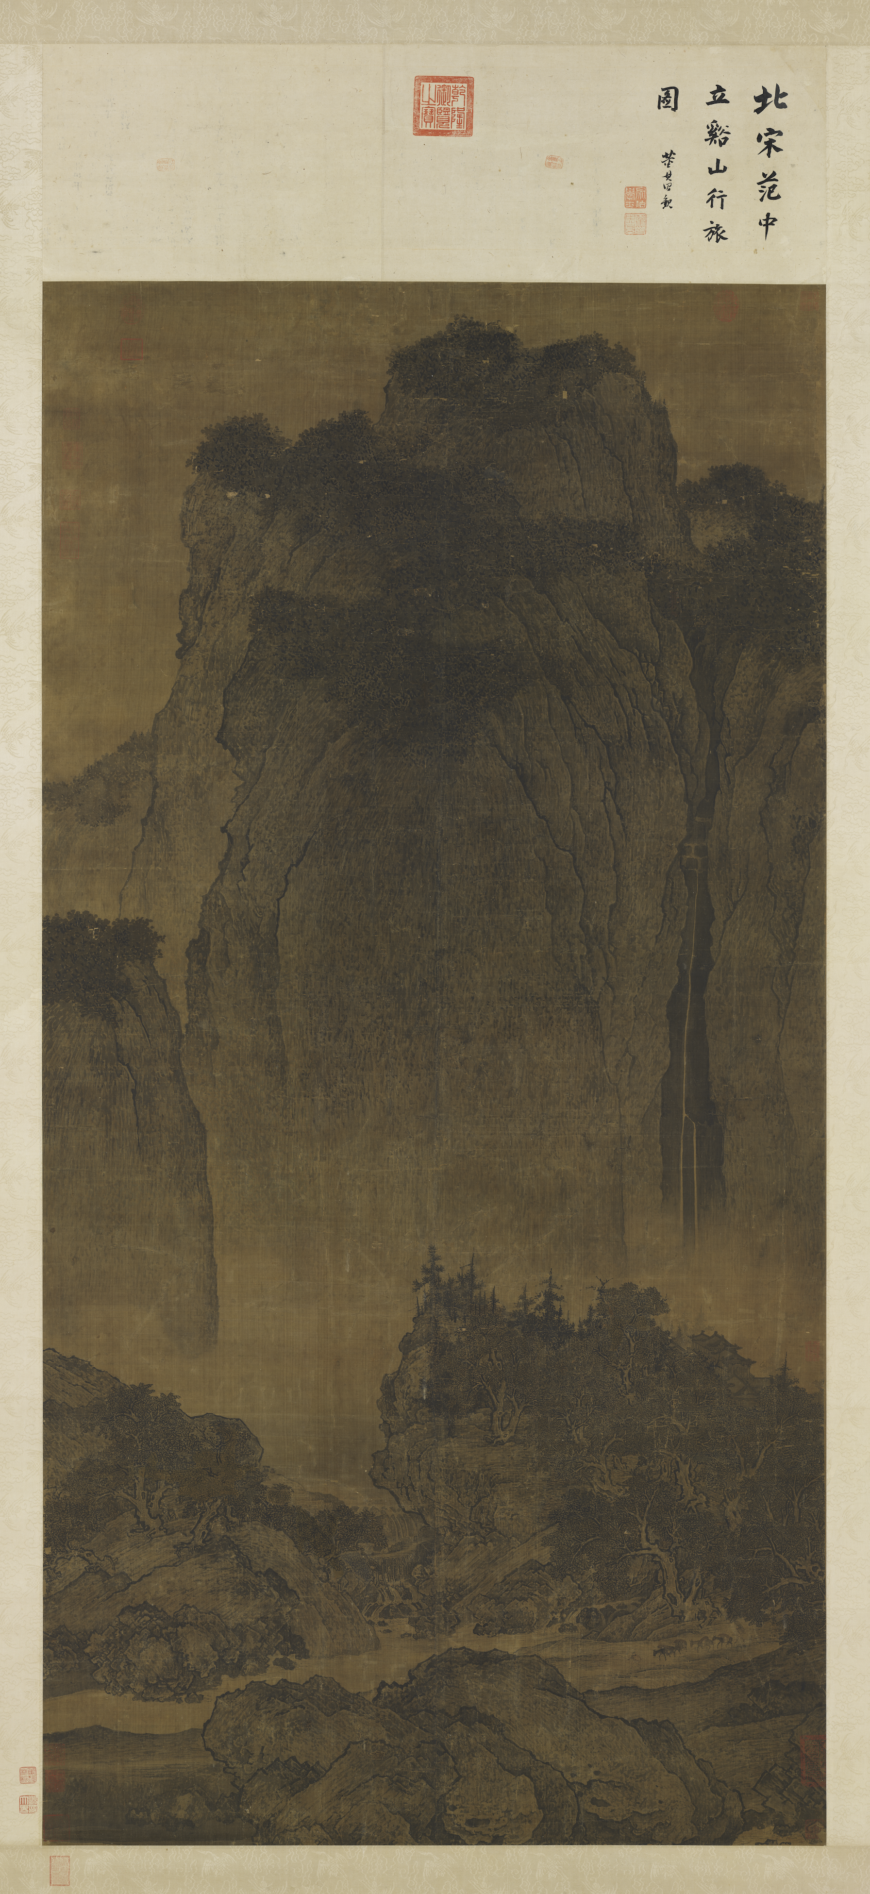 Fan Kuan, Travelers by Streams and Mountains, ink on silk hanging scroll, c. 1000, 206.3 x 103.3 cm (National Palace Museum, Taipei)